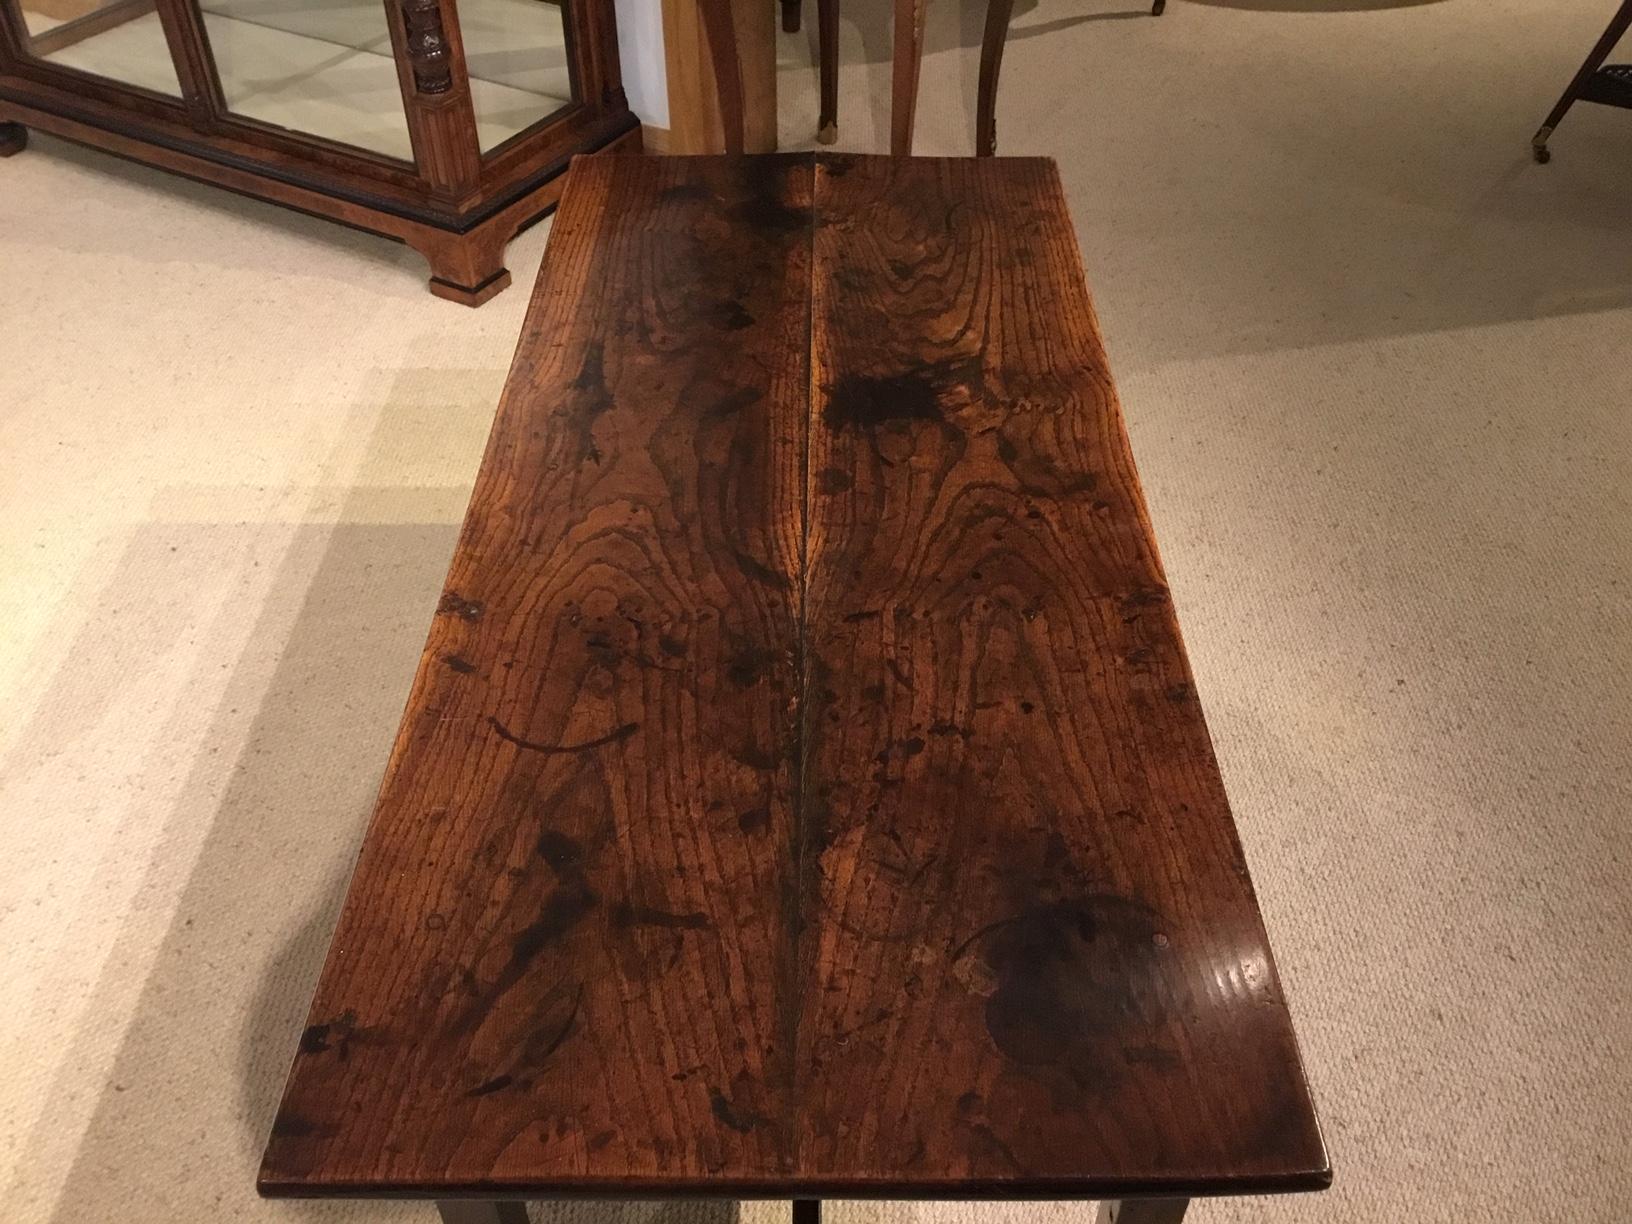 An 18th century antique elm coffee table. Having a rectangular two plank elm top of wonderful colour and patination, with an elm frieze and square supports, united by an H stretcher. English circa 1780-1800

Condition: This table is in superb